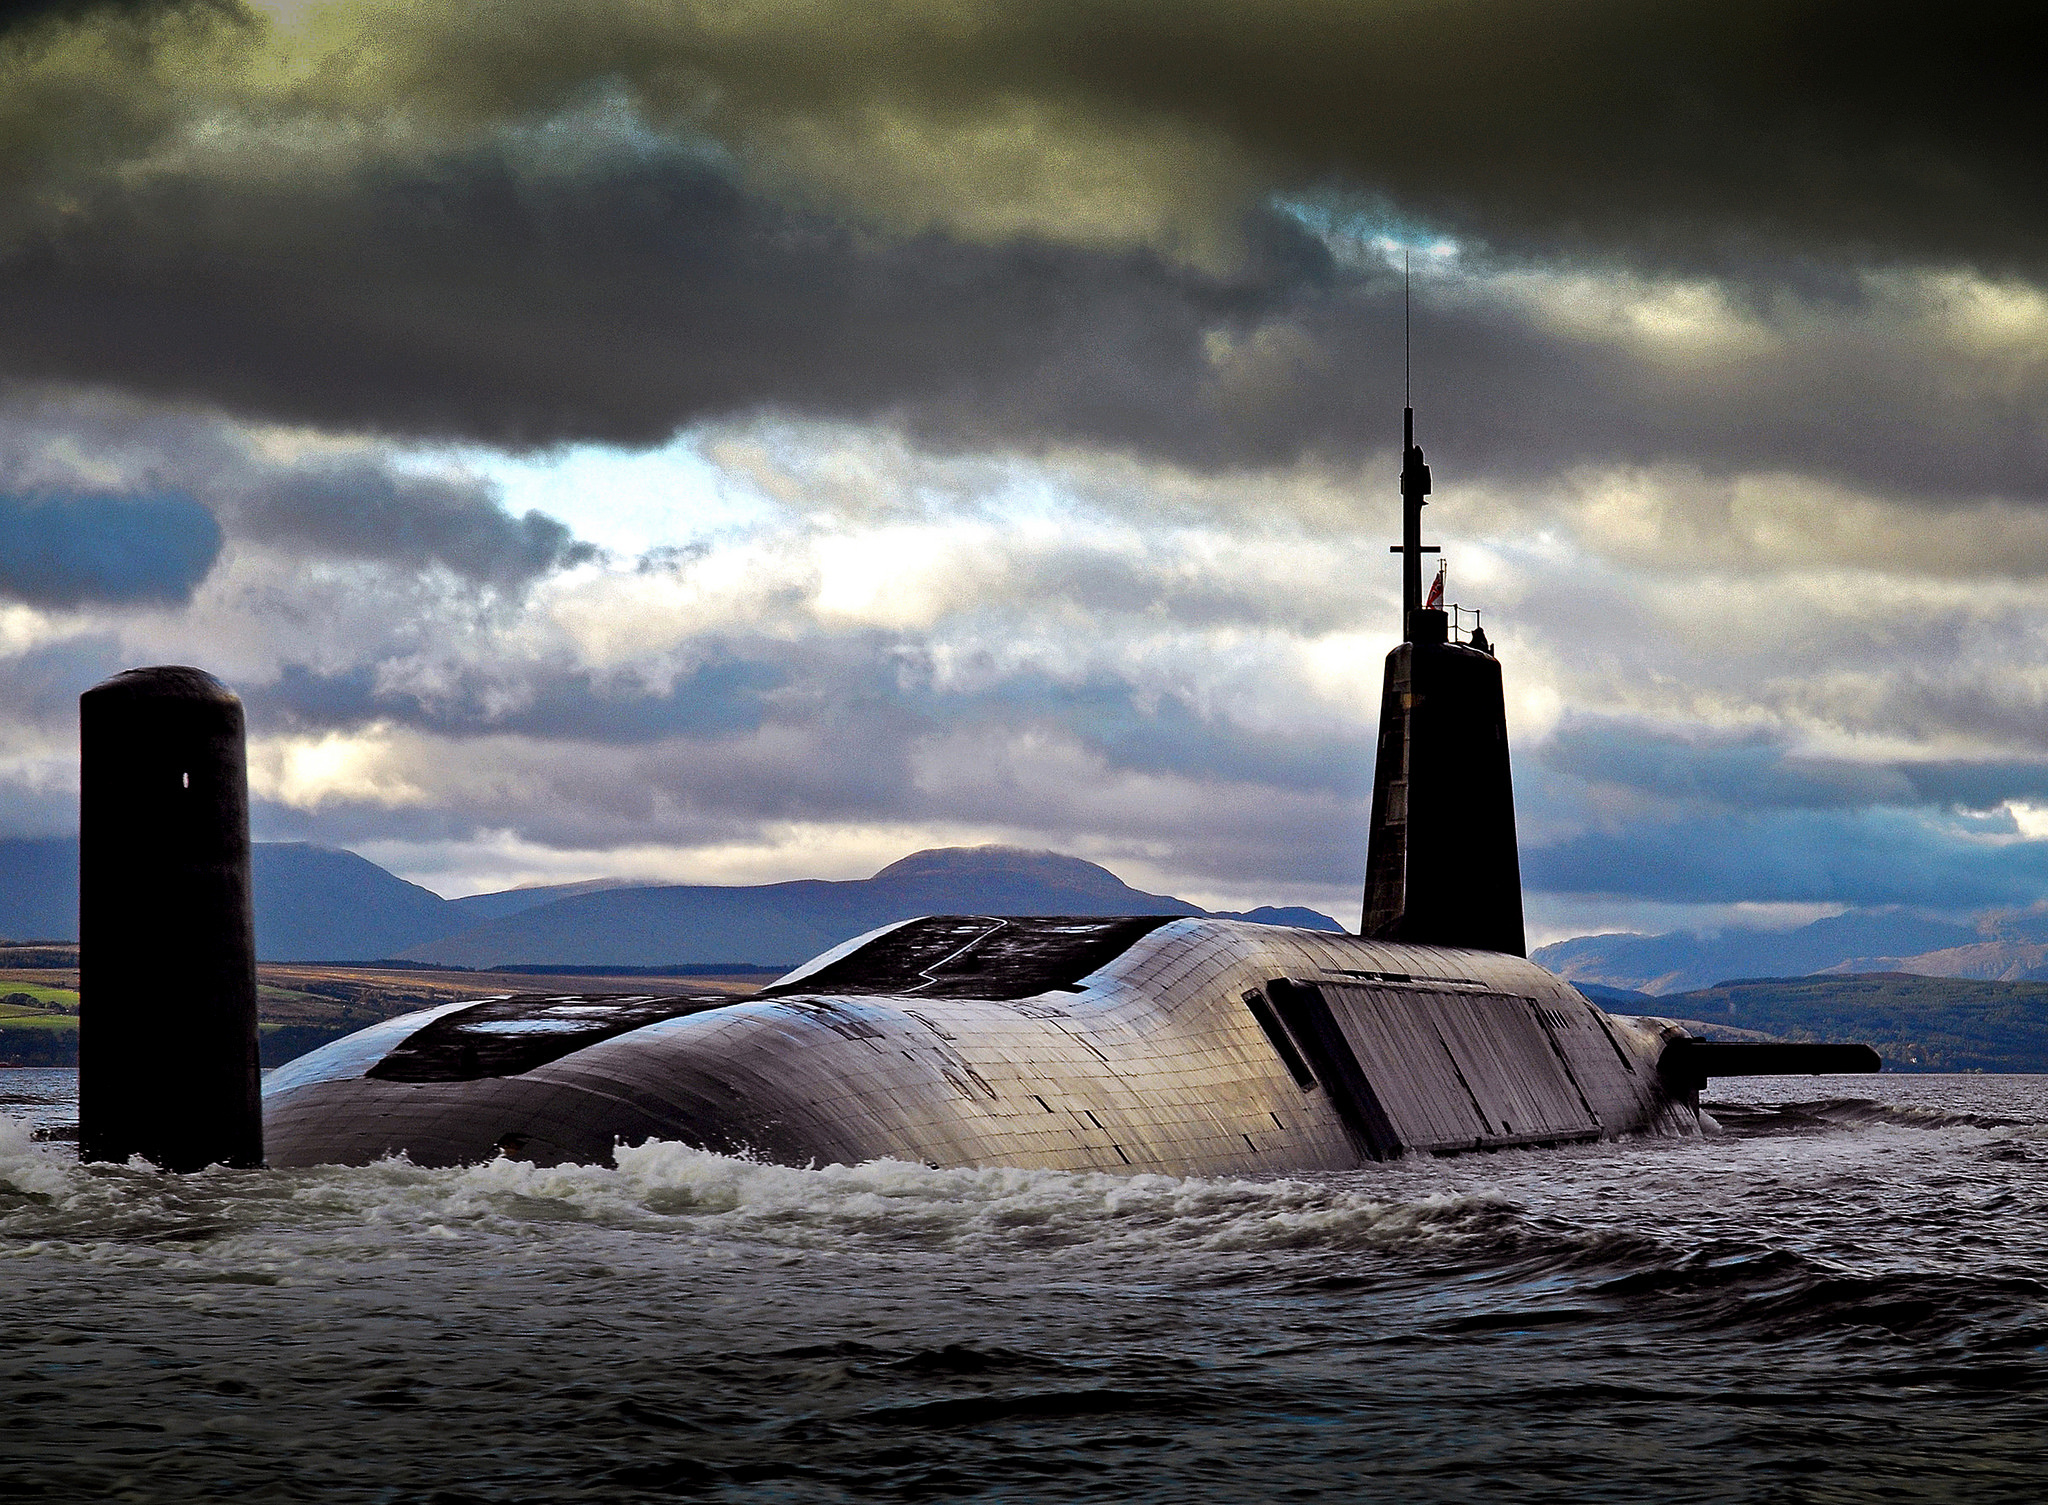 Hms vengeance nuclear submarine boat type vanguard wallpapers